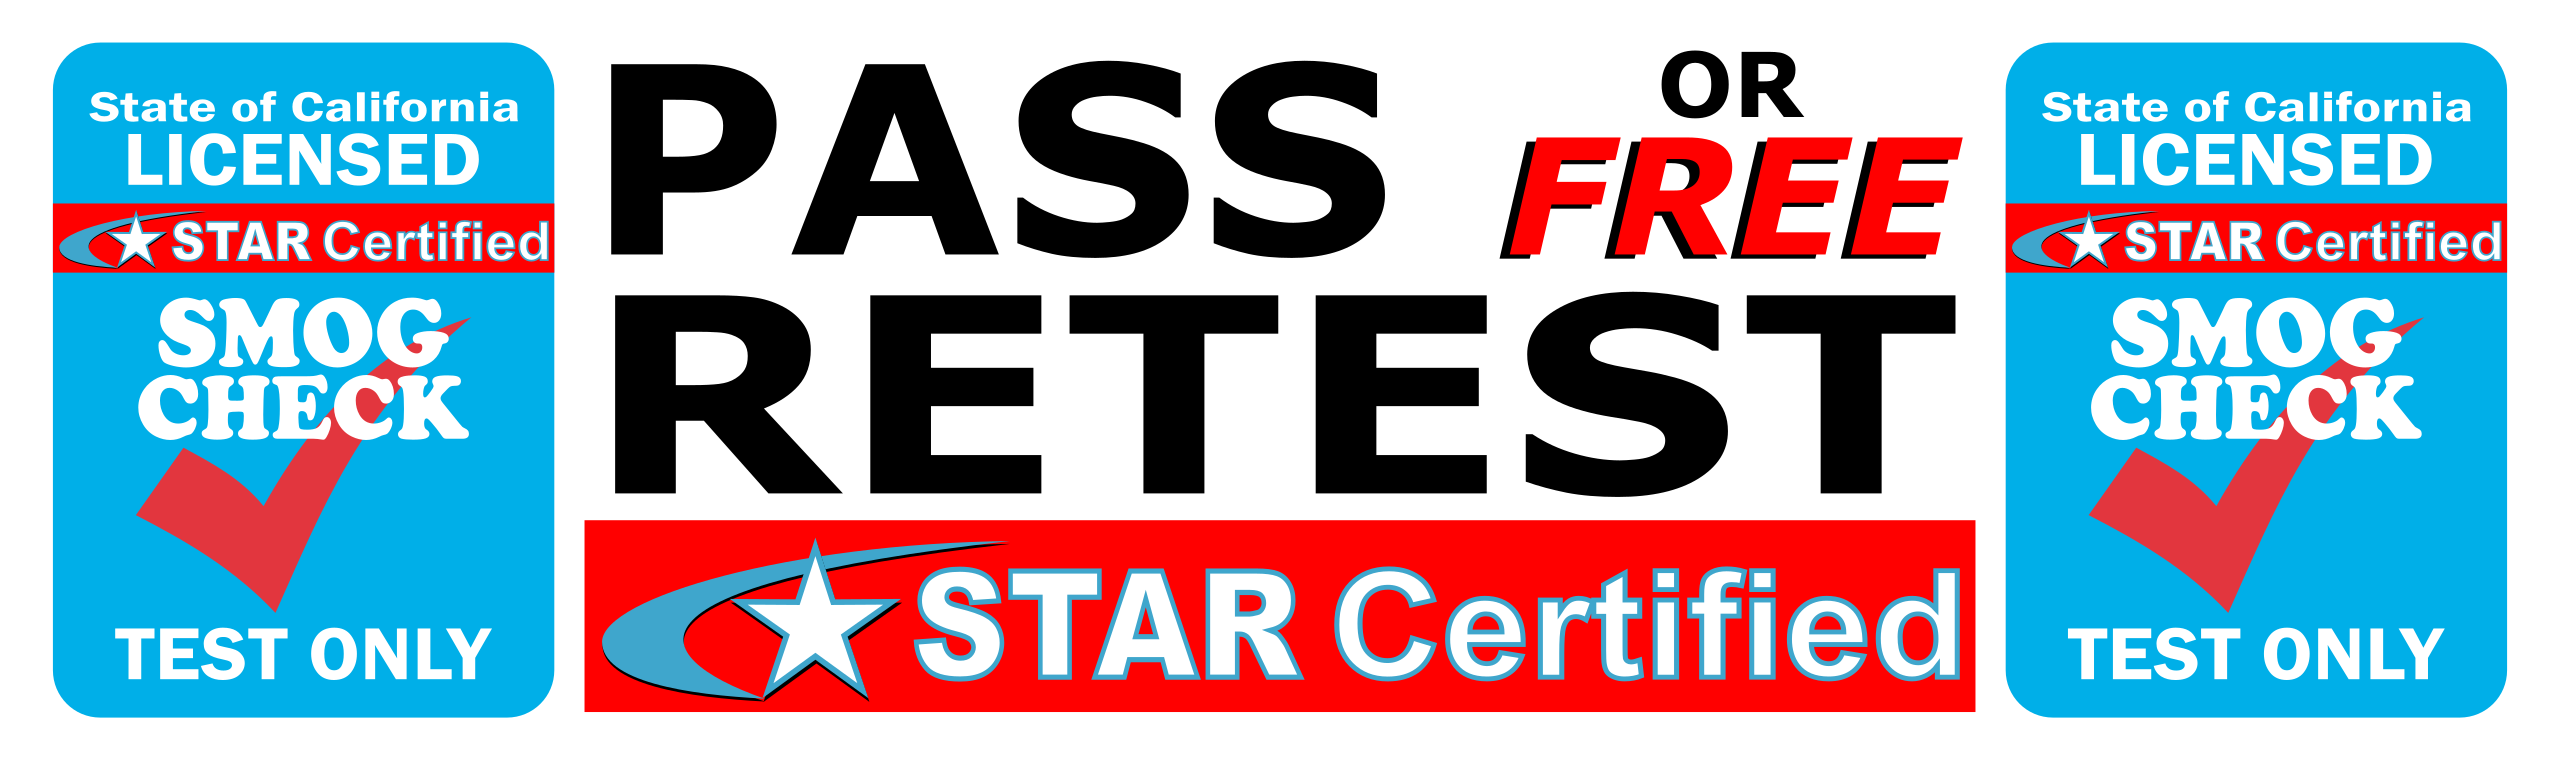 PASS OR FREE RETEST TEST ONLY STAR CERTIFIED BANNER